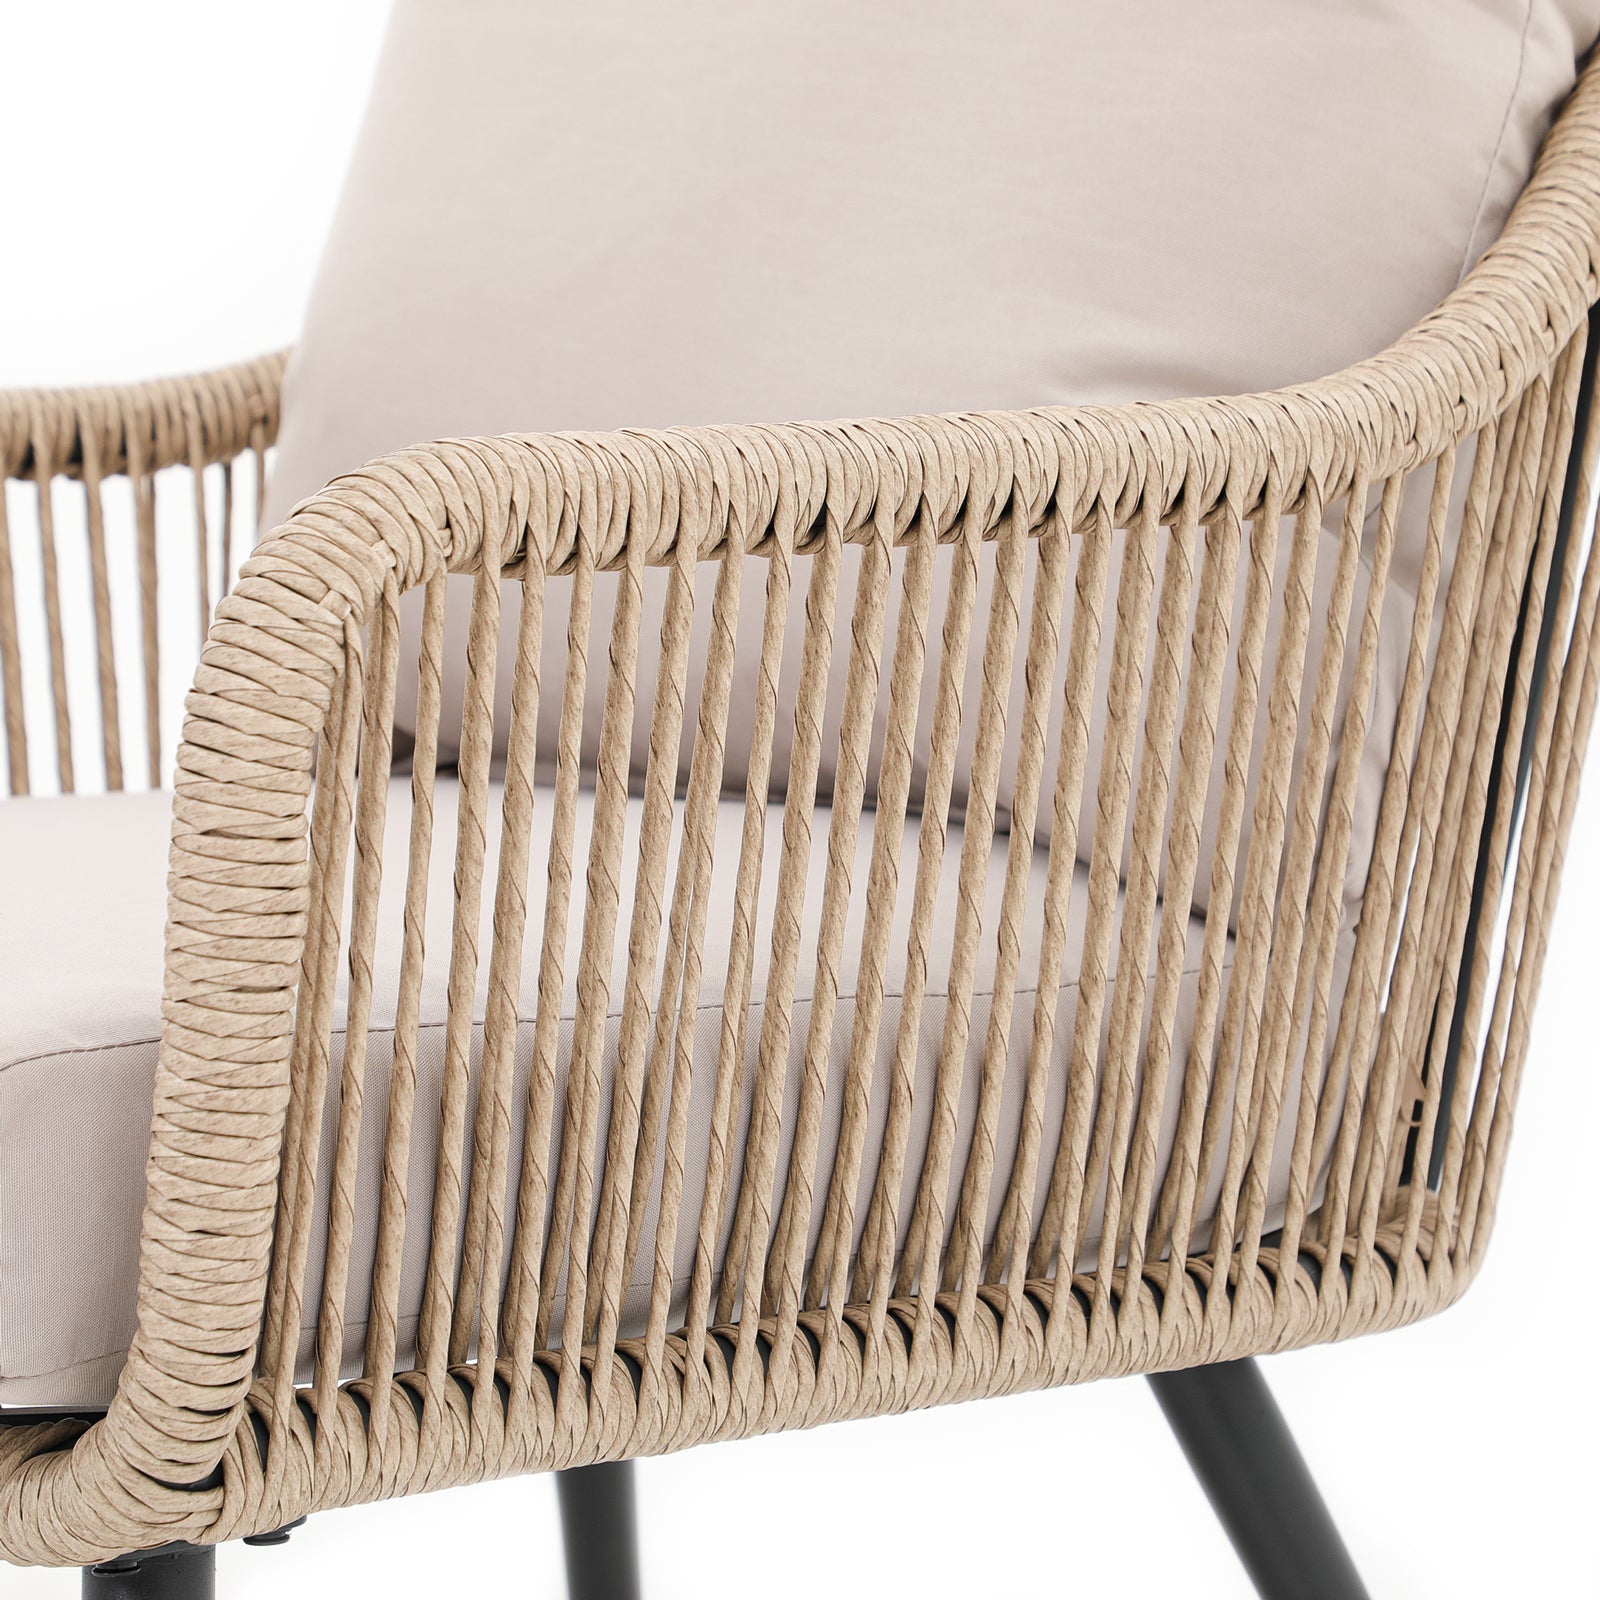 Hallerbos Wicker Lounge Chairs with Twisted Rattan design, armrest details - Jardina Furniture#Color_Natural